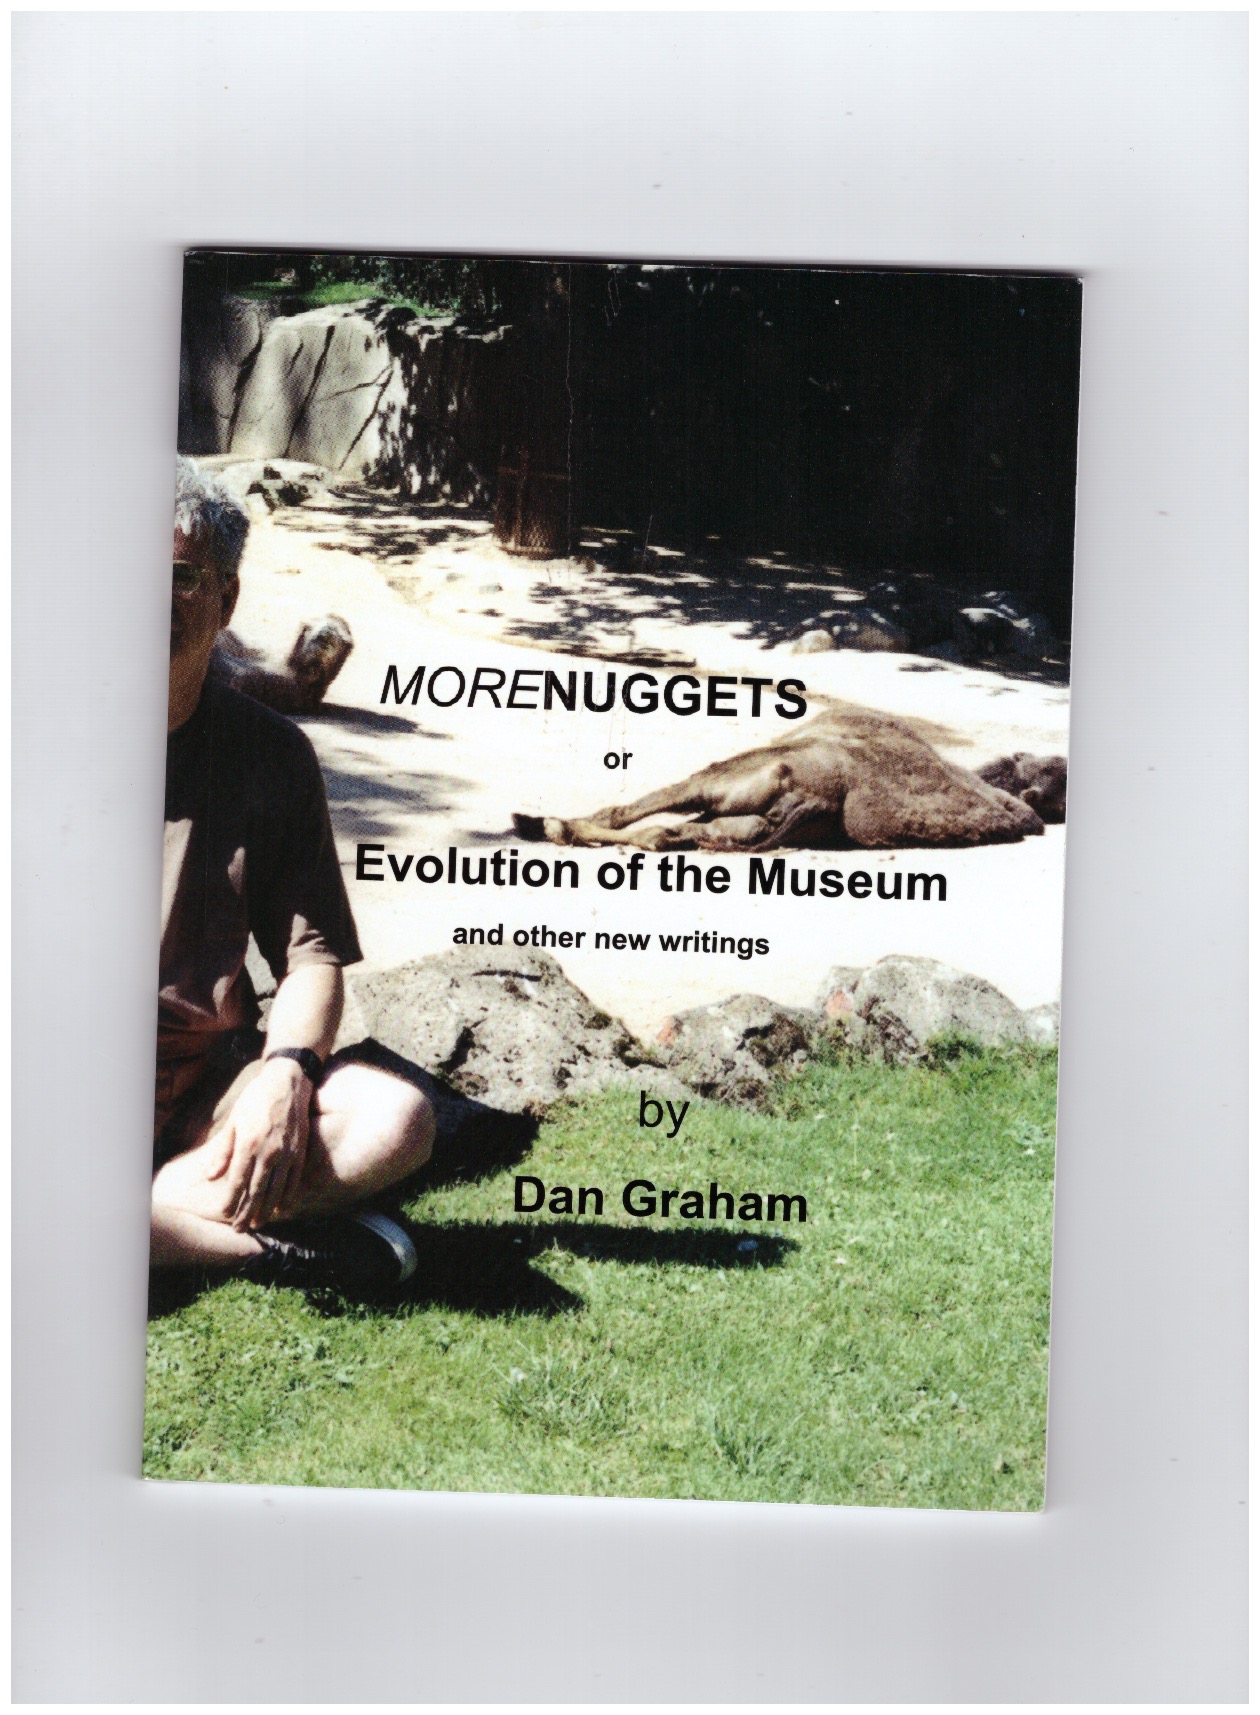 GRAHAM, Dan - MORENUGGETS or Evolution of the Museum and other new writings